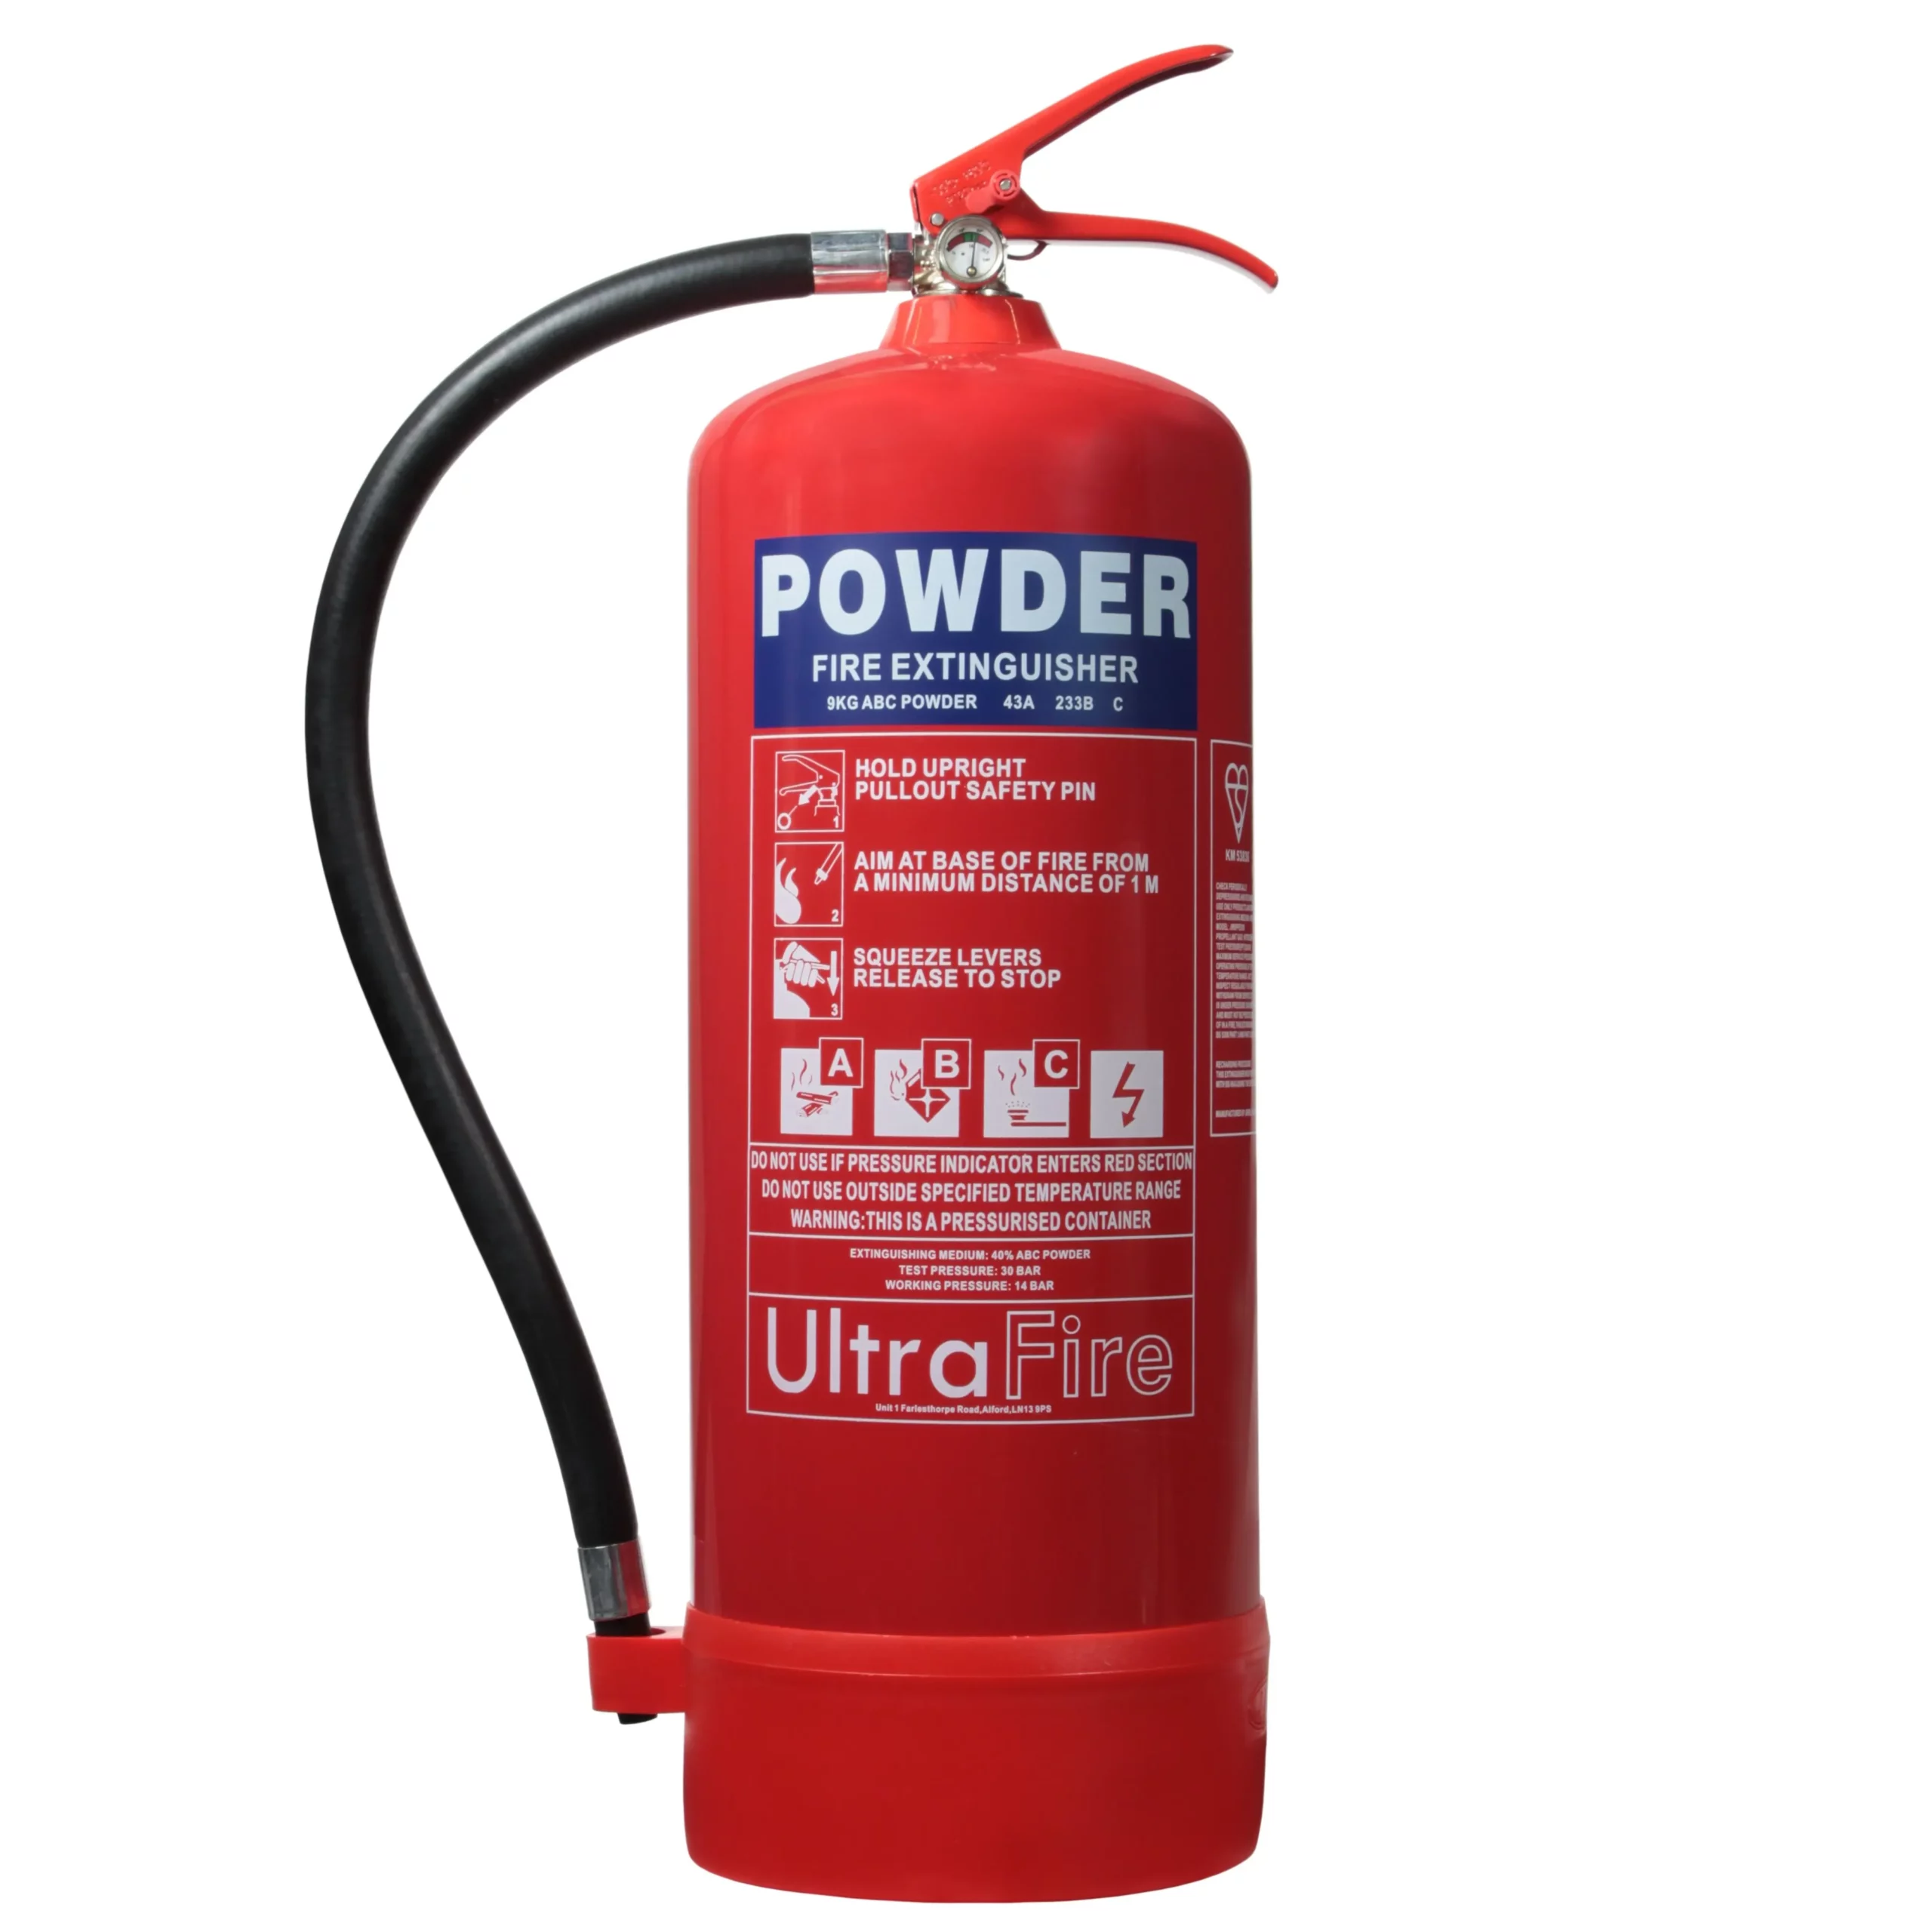 Servicing and checks for fire extinguishers like this powder fire extinguisher.